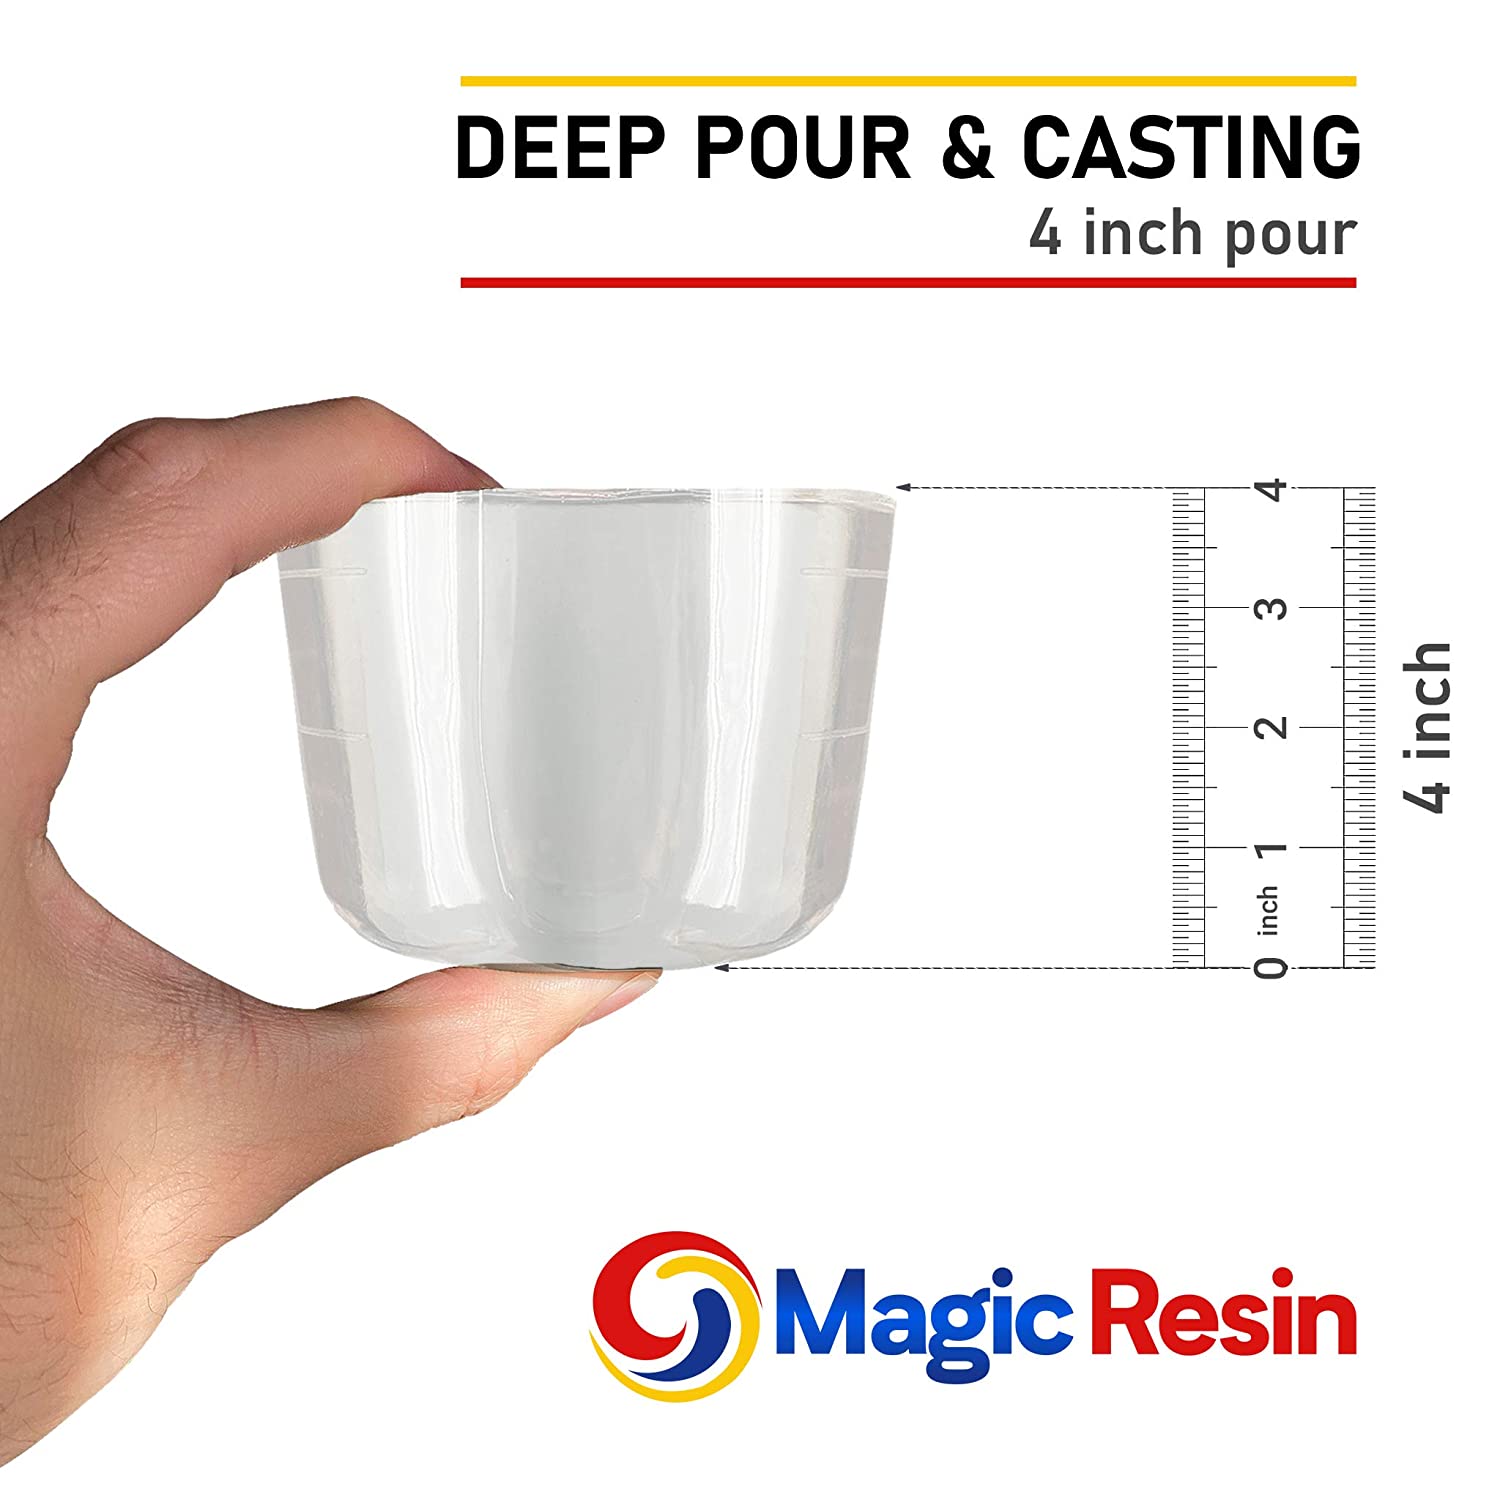 Deep Pour Epoxy Resin for River Table | 3 Gallon (11.4 L) | 4'' Deep Pour & Casting Epoxy Resin Kit | Low Odor | Crystal Clear and High Gloss | for